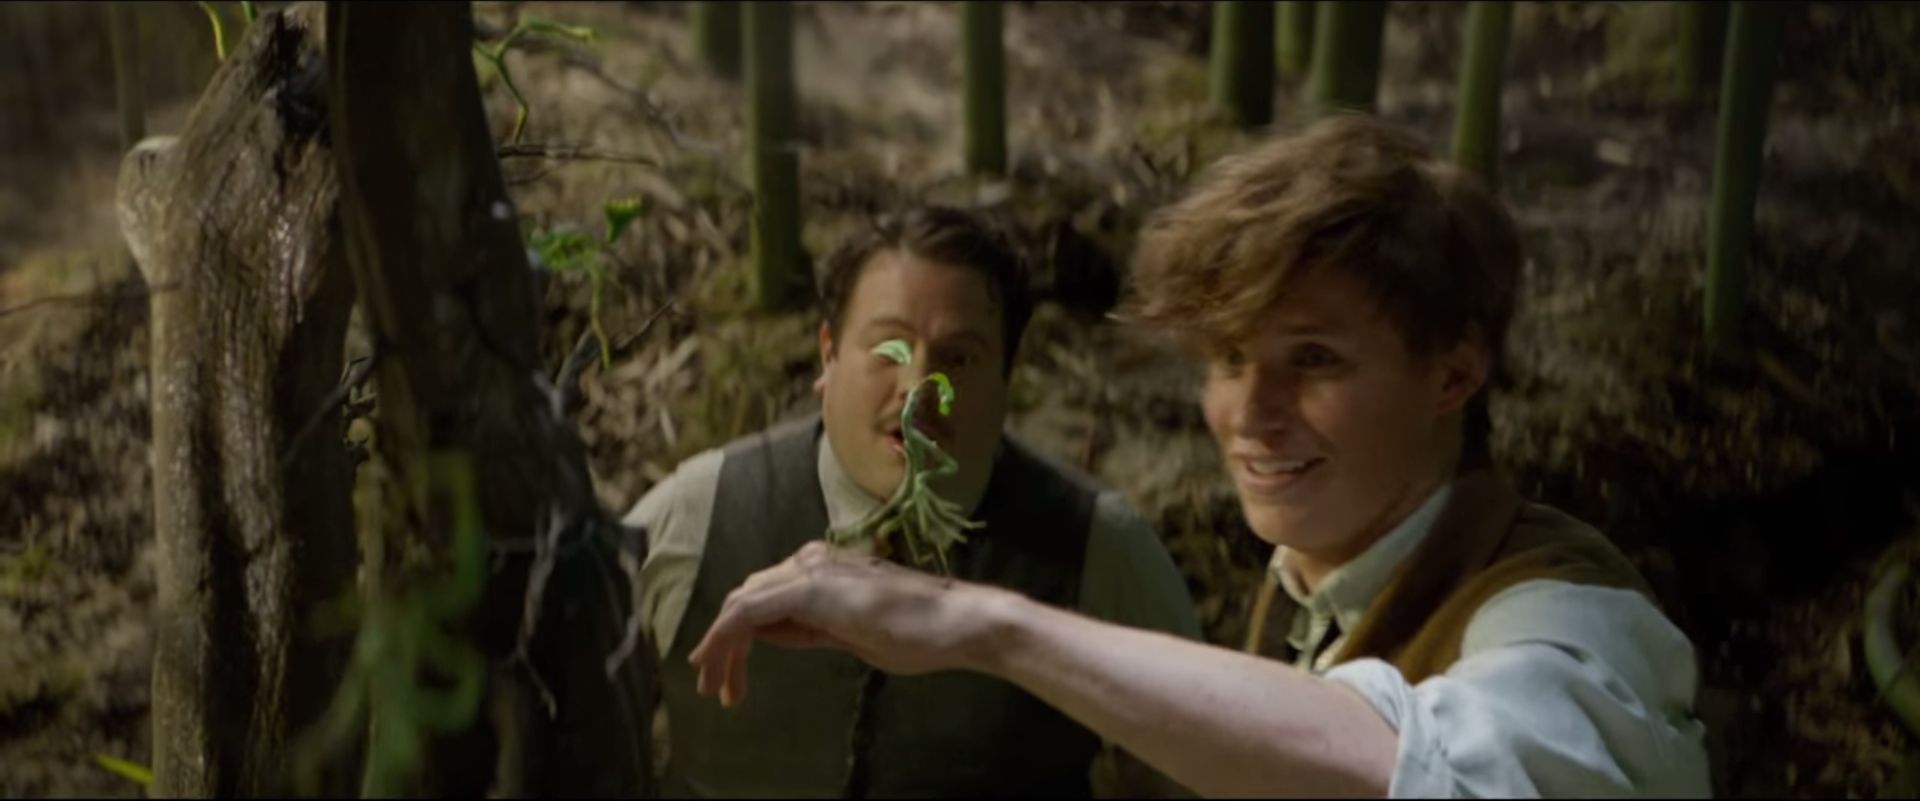 Film Online 2016 Fantastic Beasts And Where To Find Them Watch